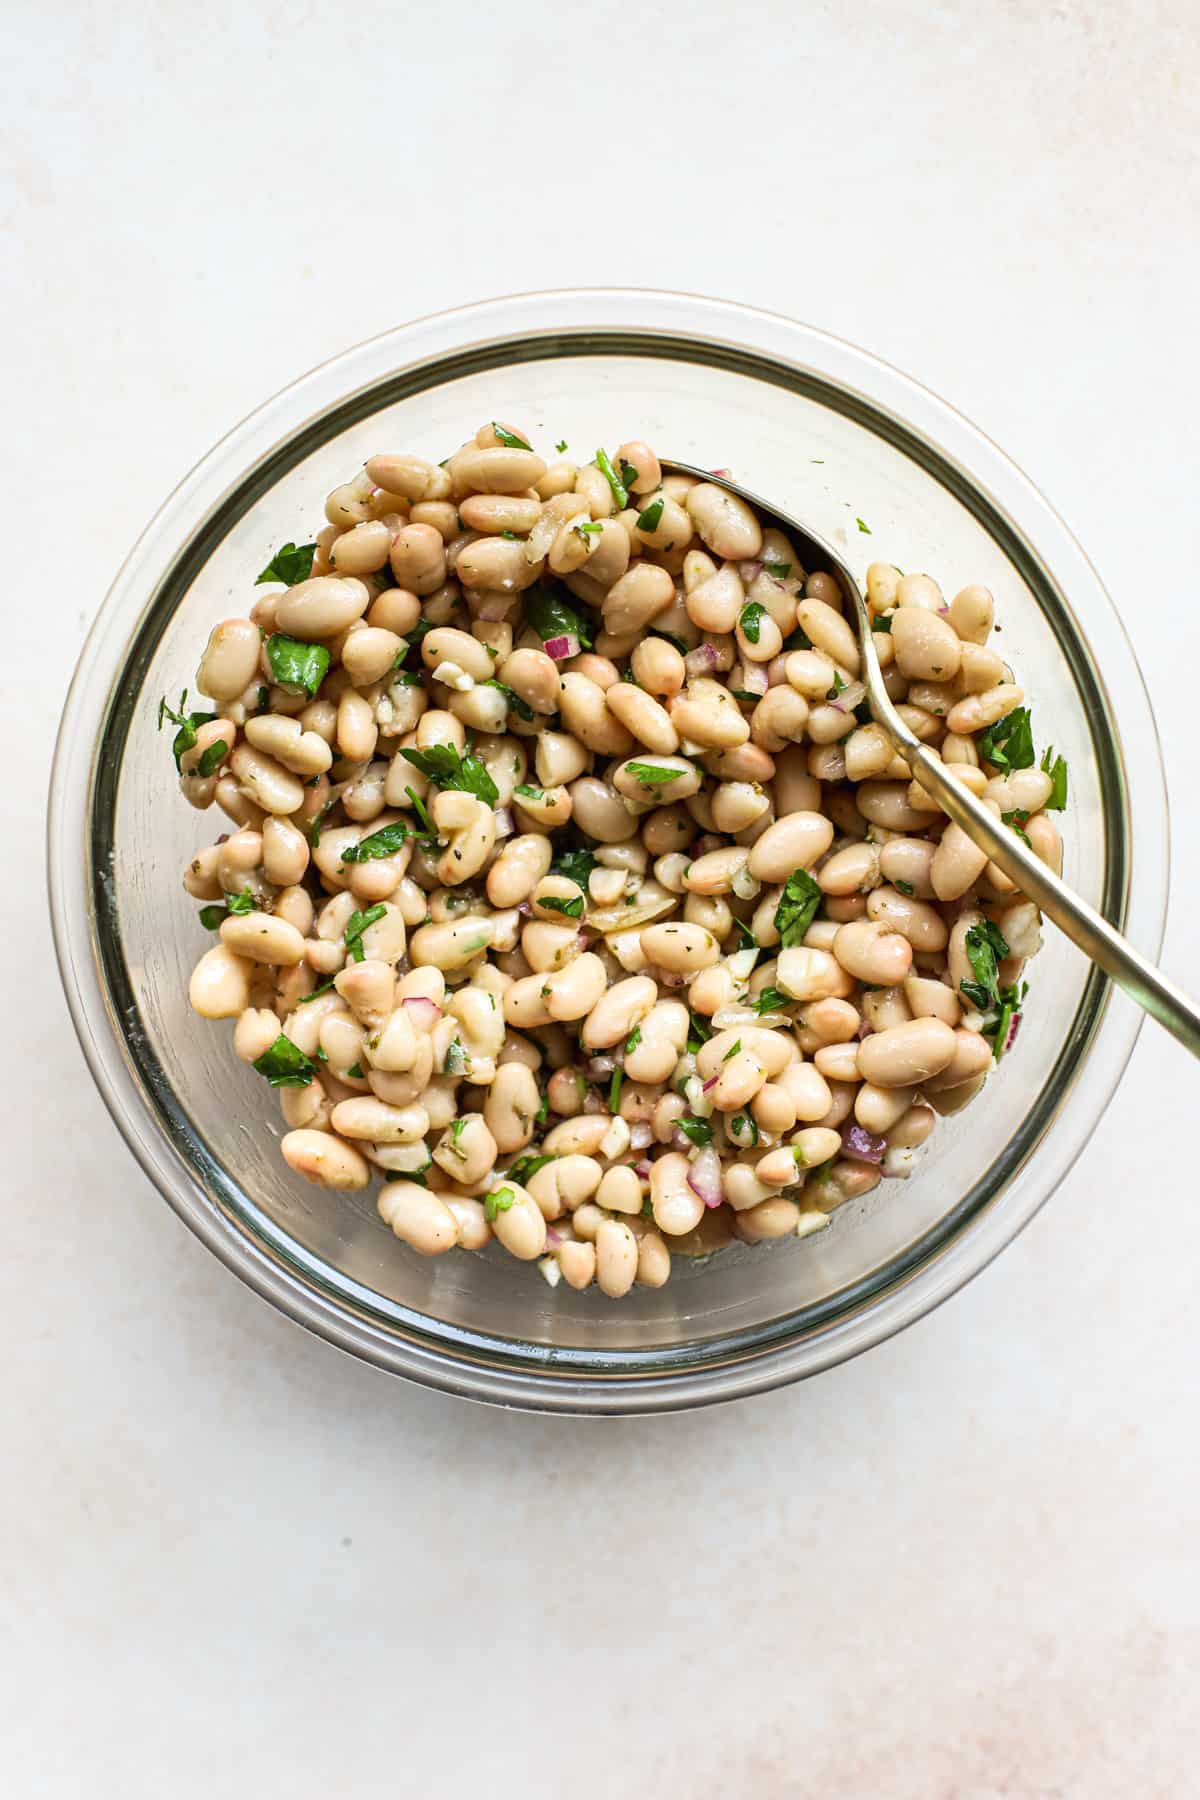 Marinated white beans stirred together with golden spoon in clear glass bowl, on beige and white surface